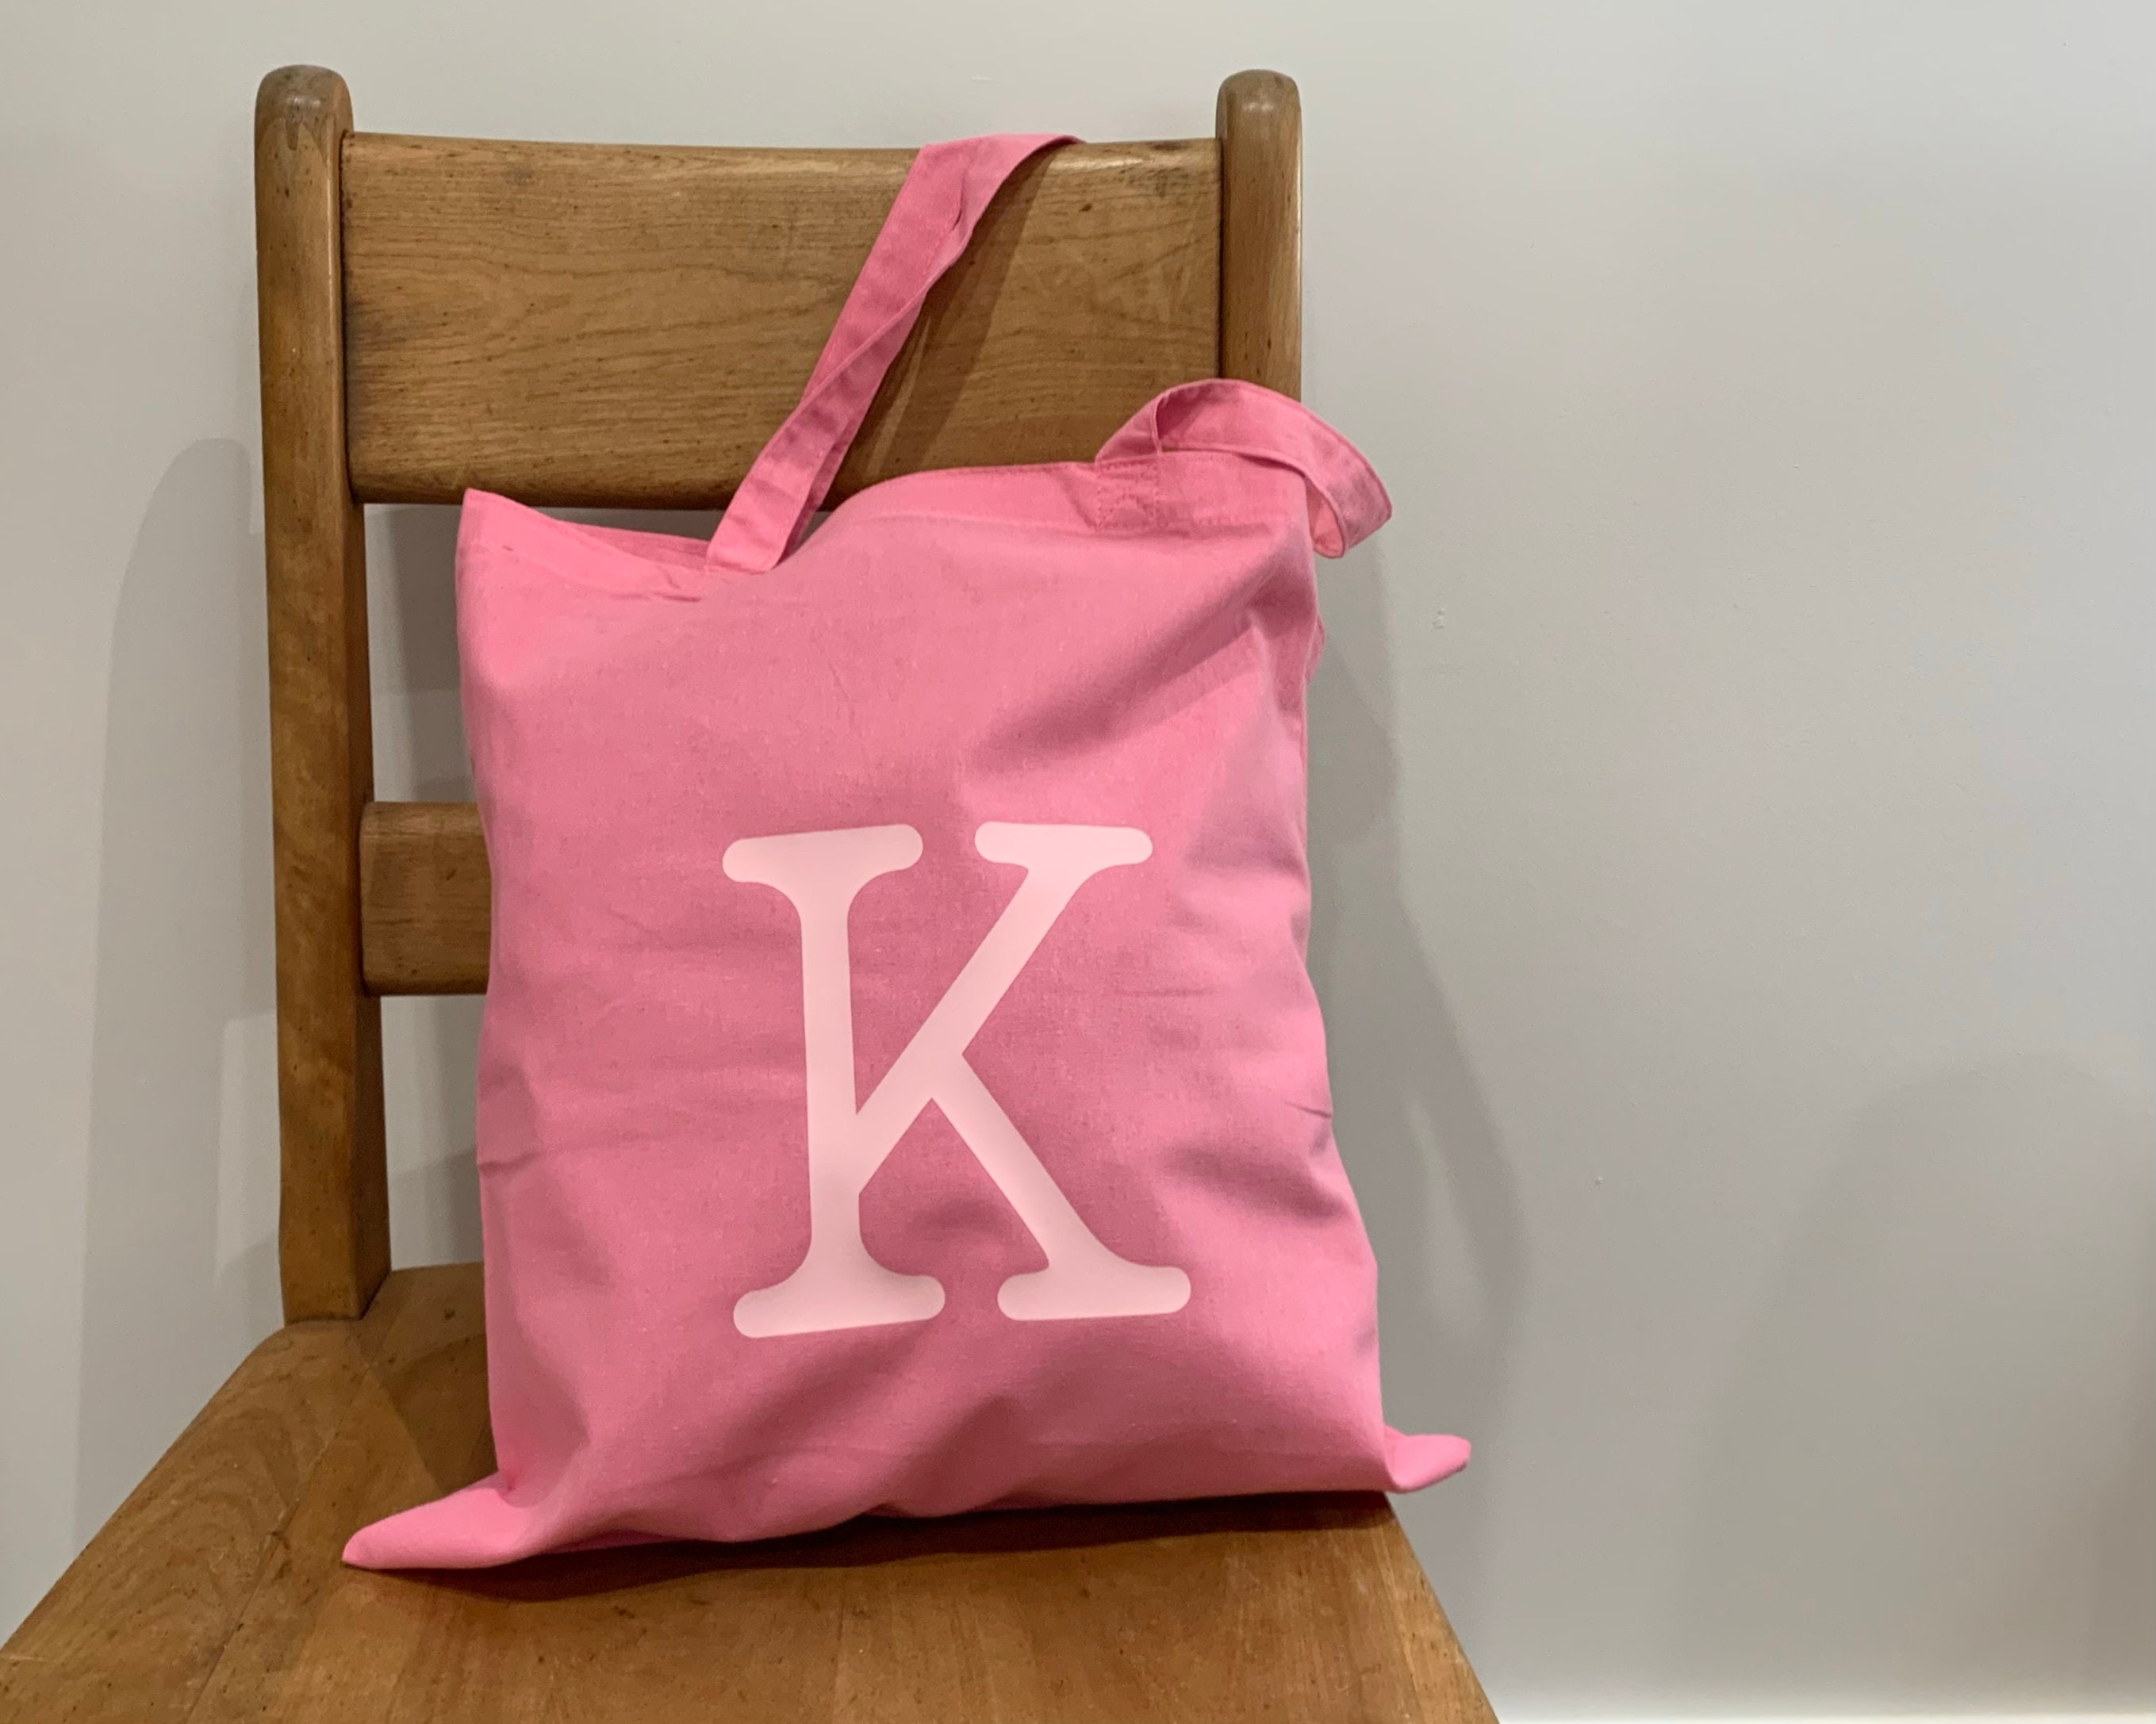 PERSONALISED GREY TOTE WITH NEON PINK PRINT – My Bags Of Stuff